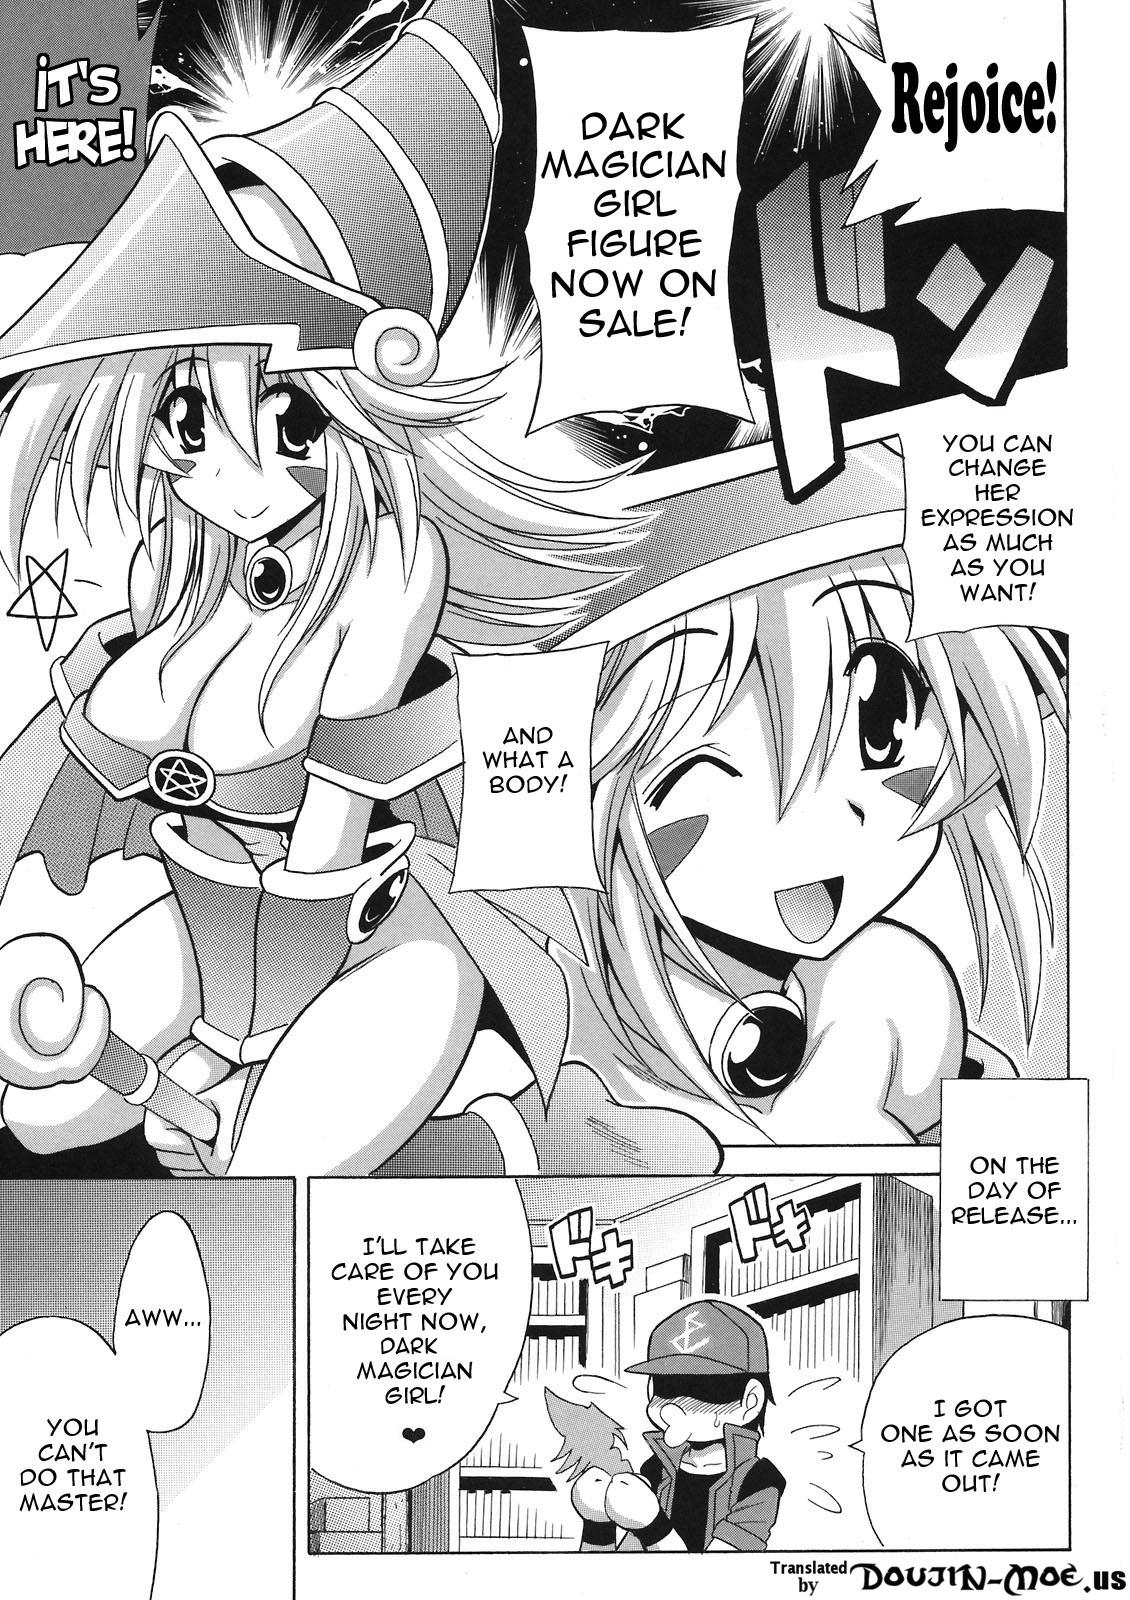 Gay Military MAGICIAN's Se★Cross | Magician's Sex Cross - Yu gi oh Relax - Page 2